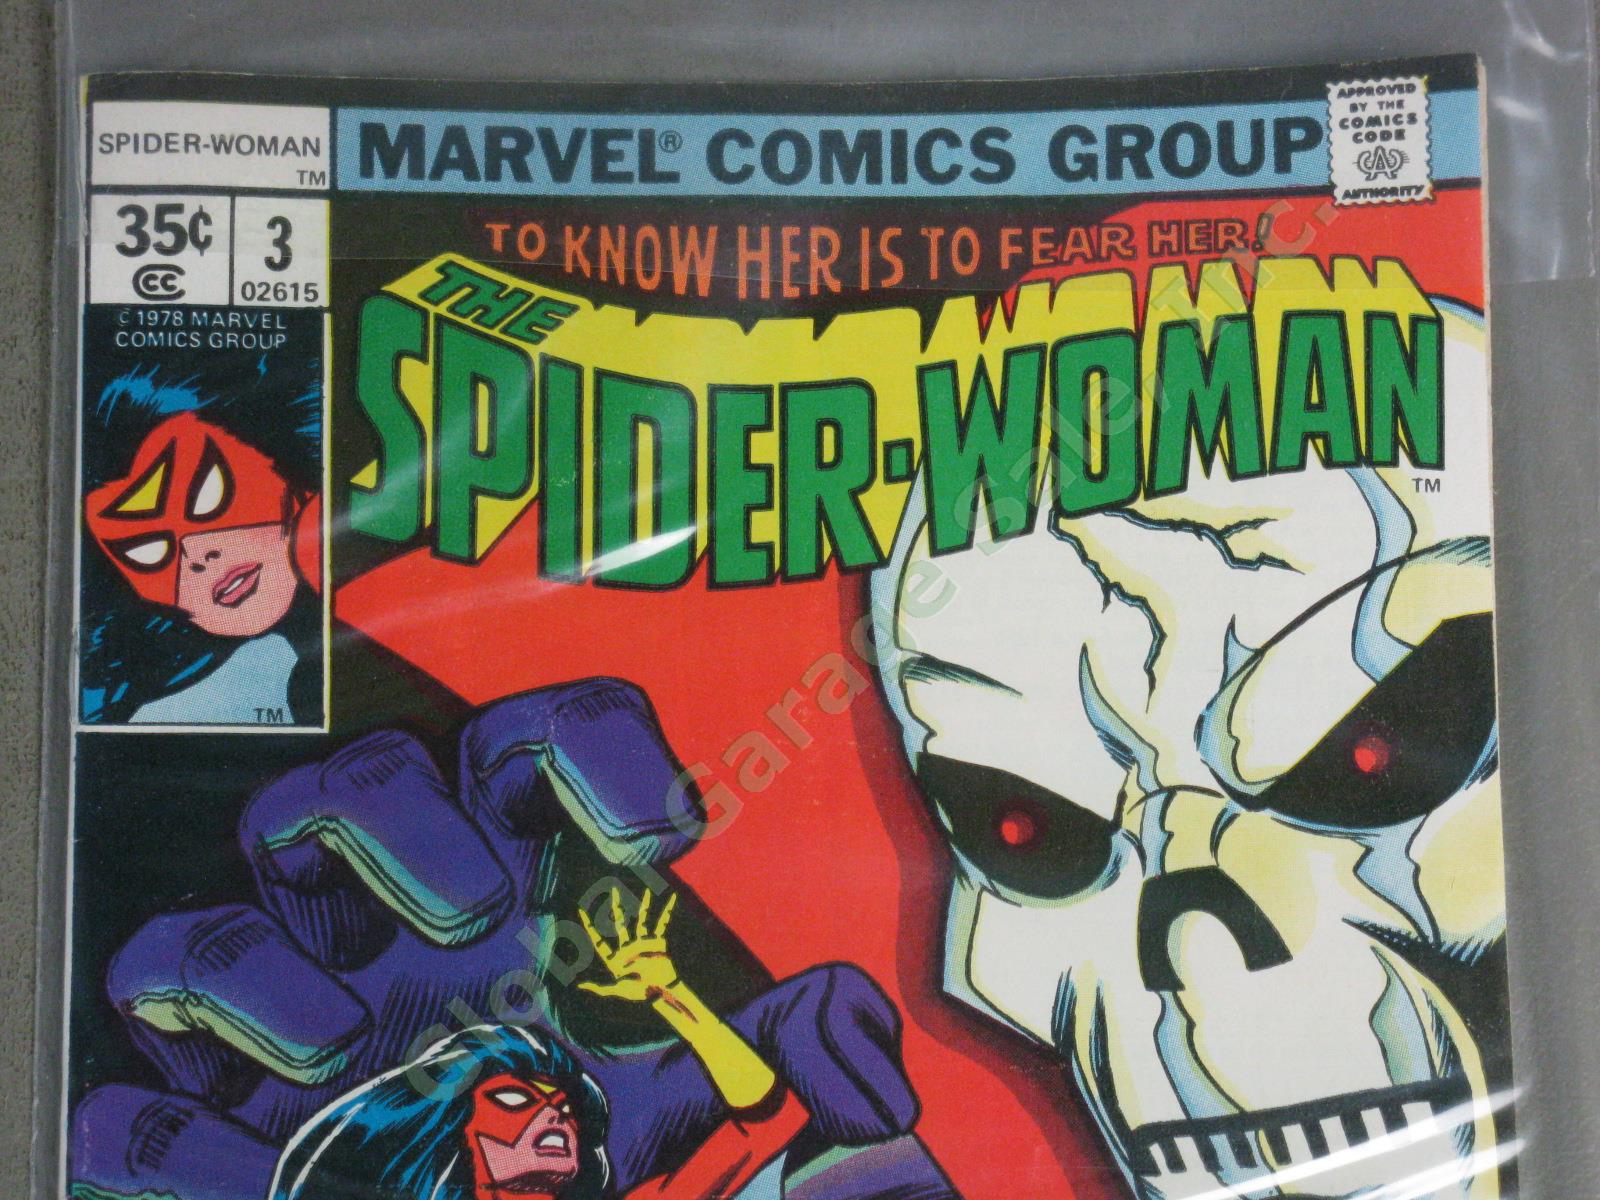 48 Vtg Marvel Spider-Woman Comic Book Collection Lot Runs 1-8 10-36 38-40 42-50 5